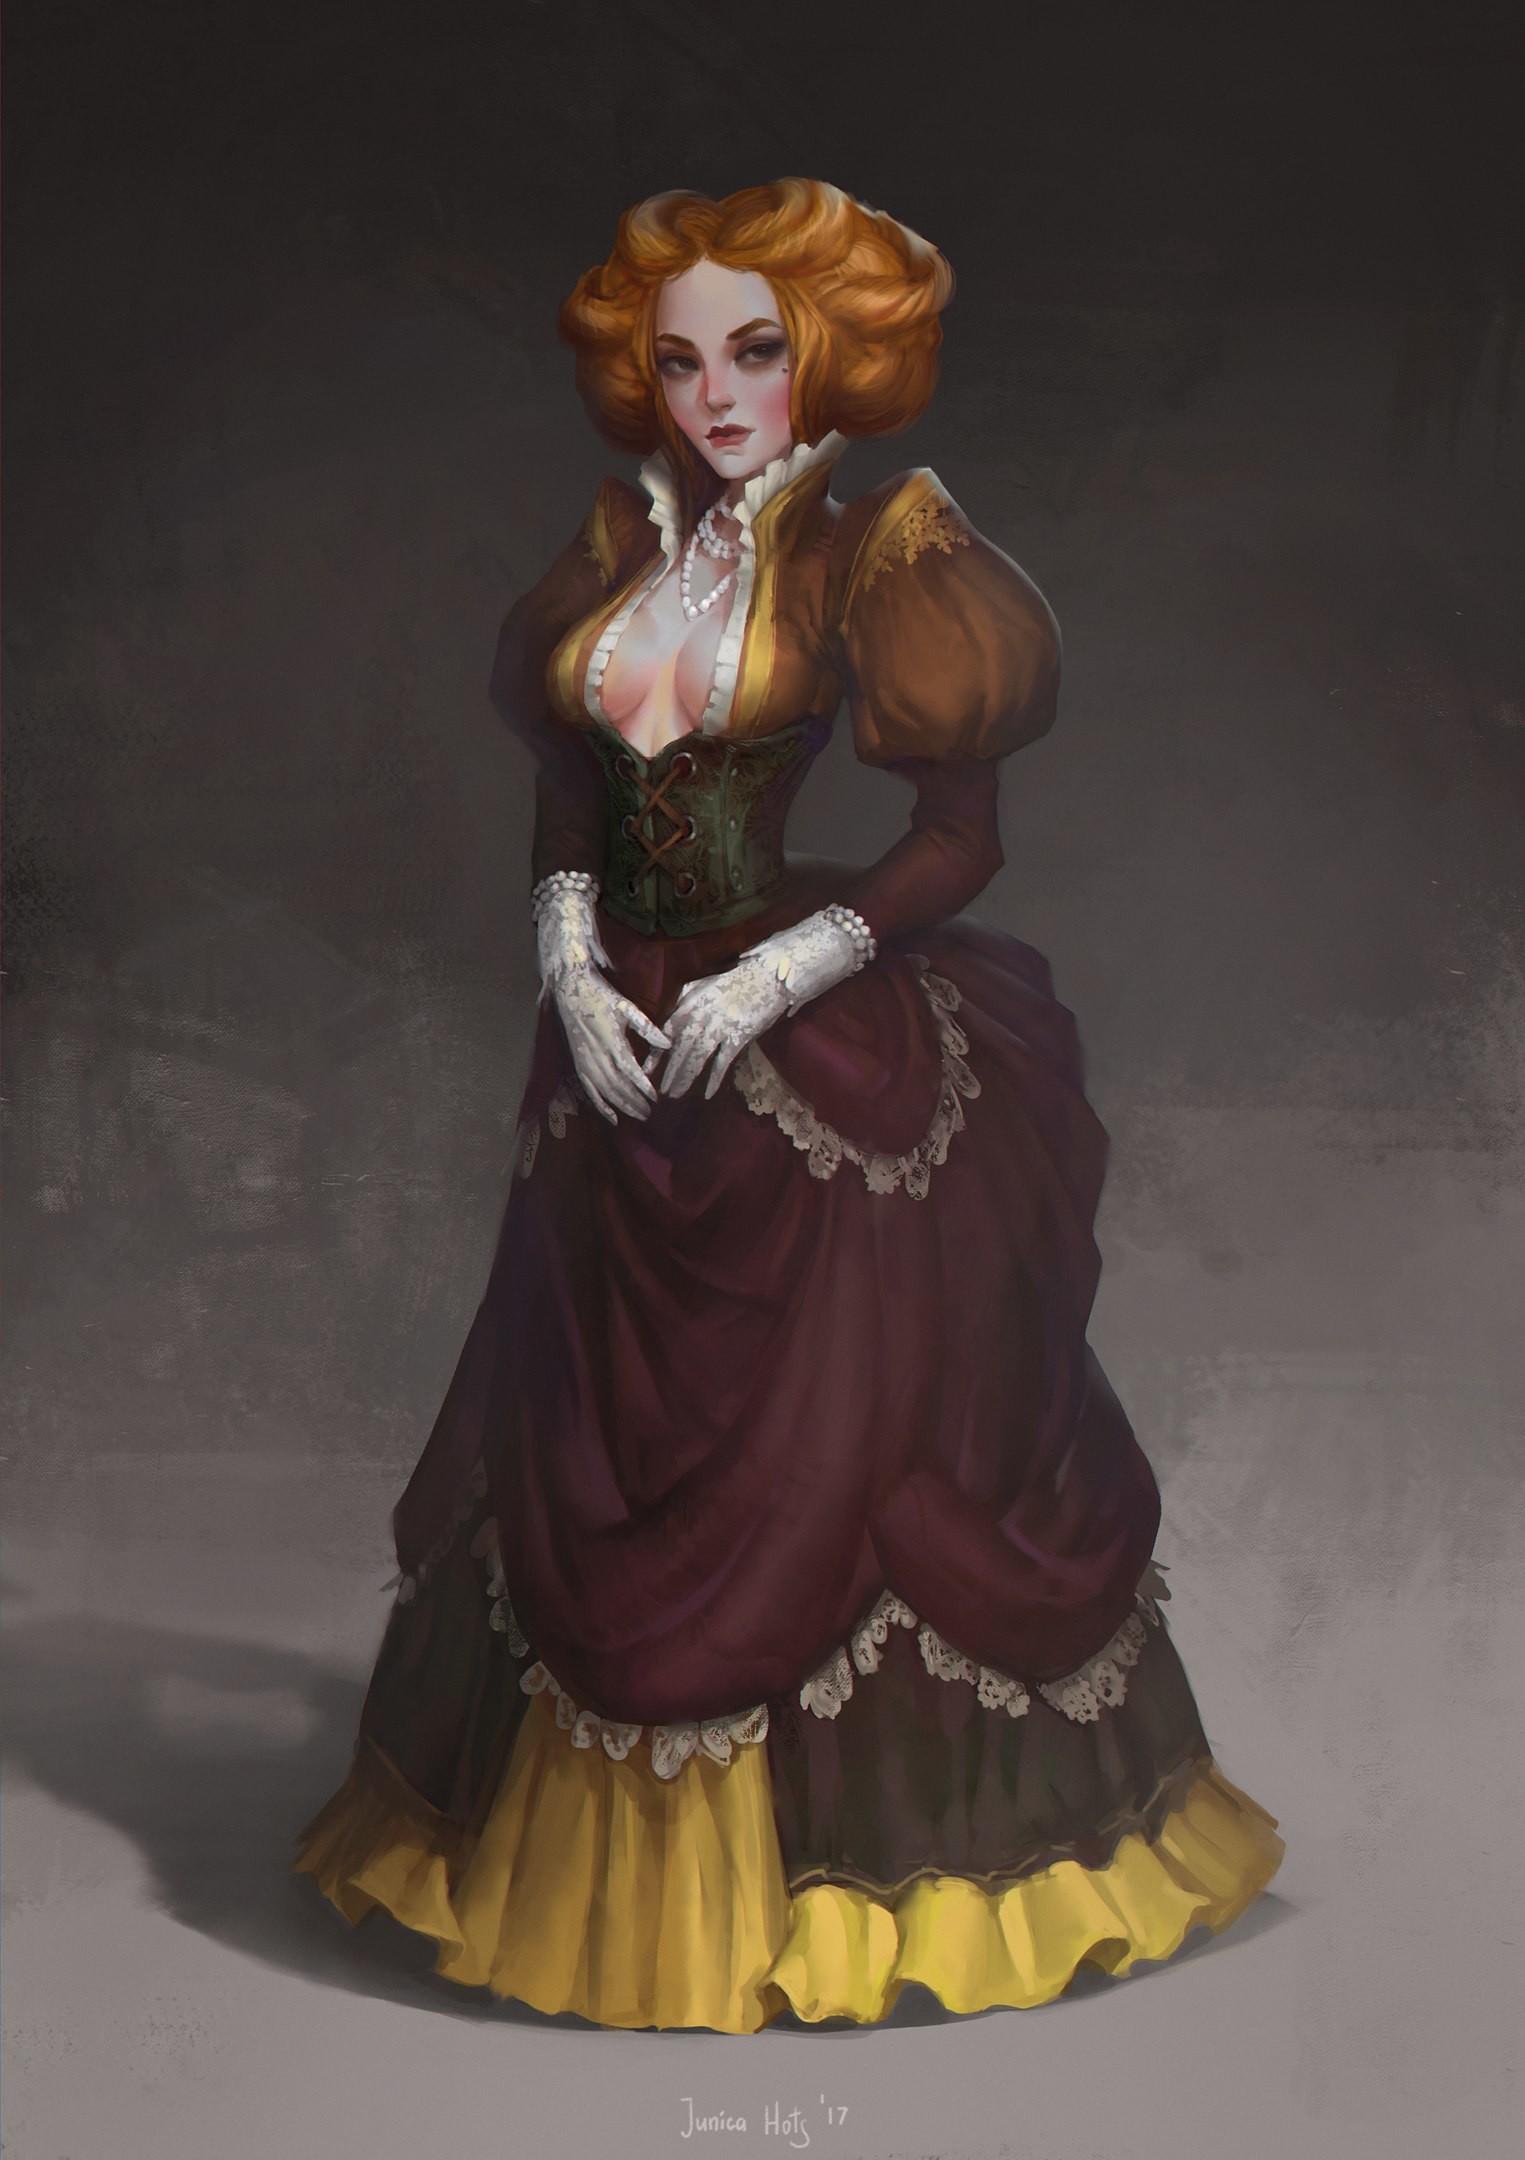 General 1525x2160 women Junica Hots artwork dress redhead boobs cleavage gloves looking at viewer